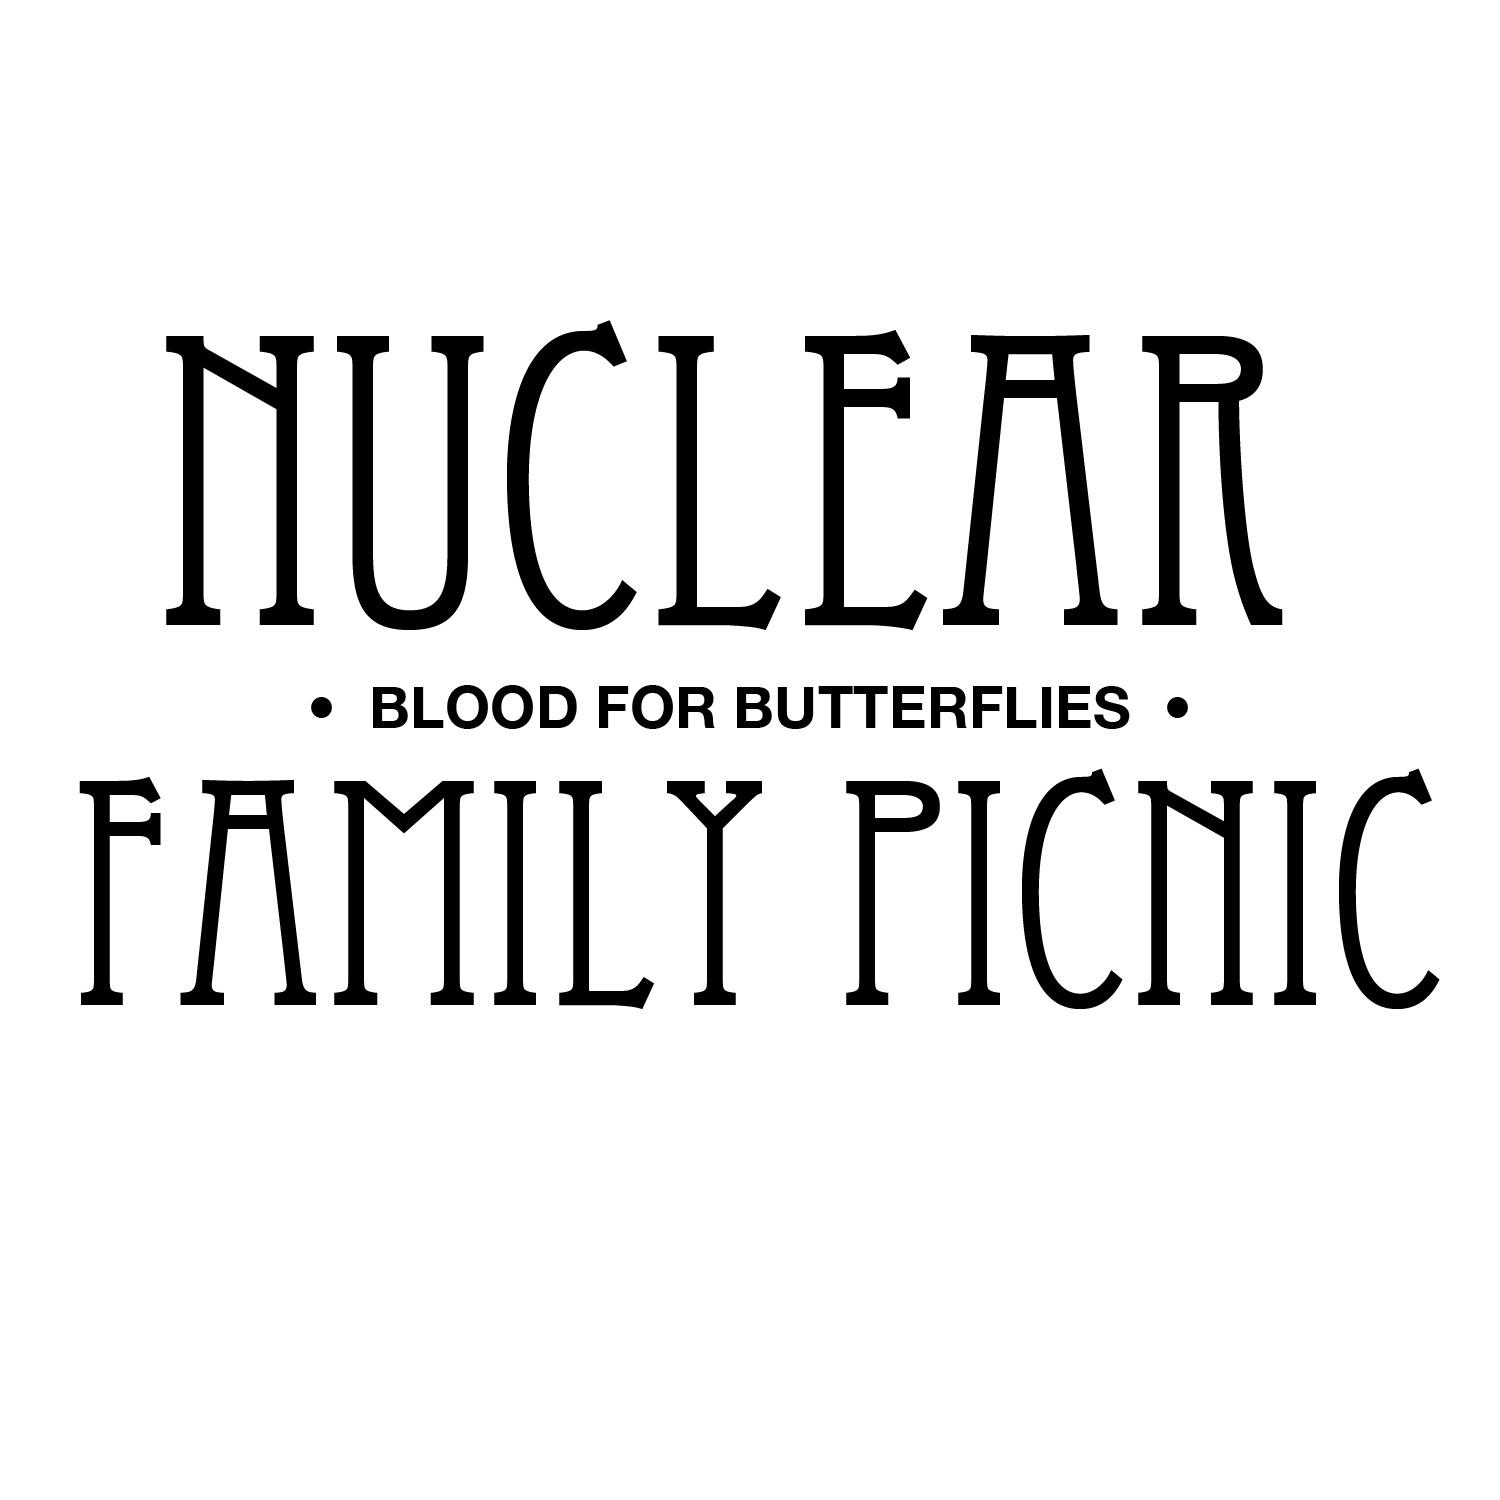 Nuclear Family Picnic EP